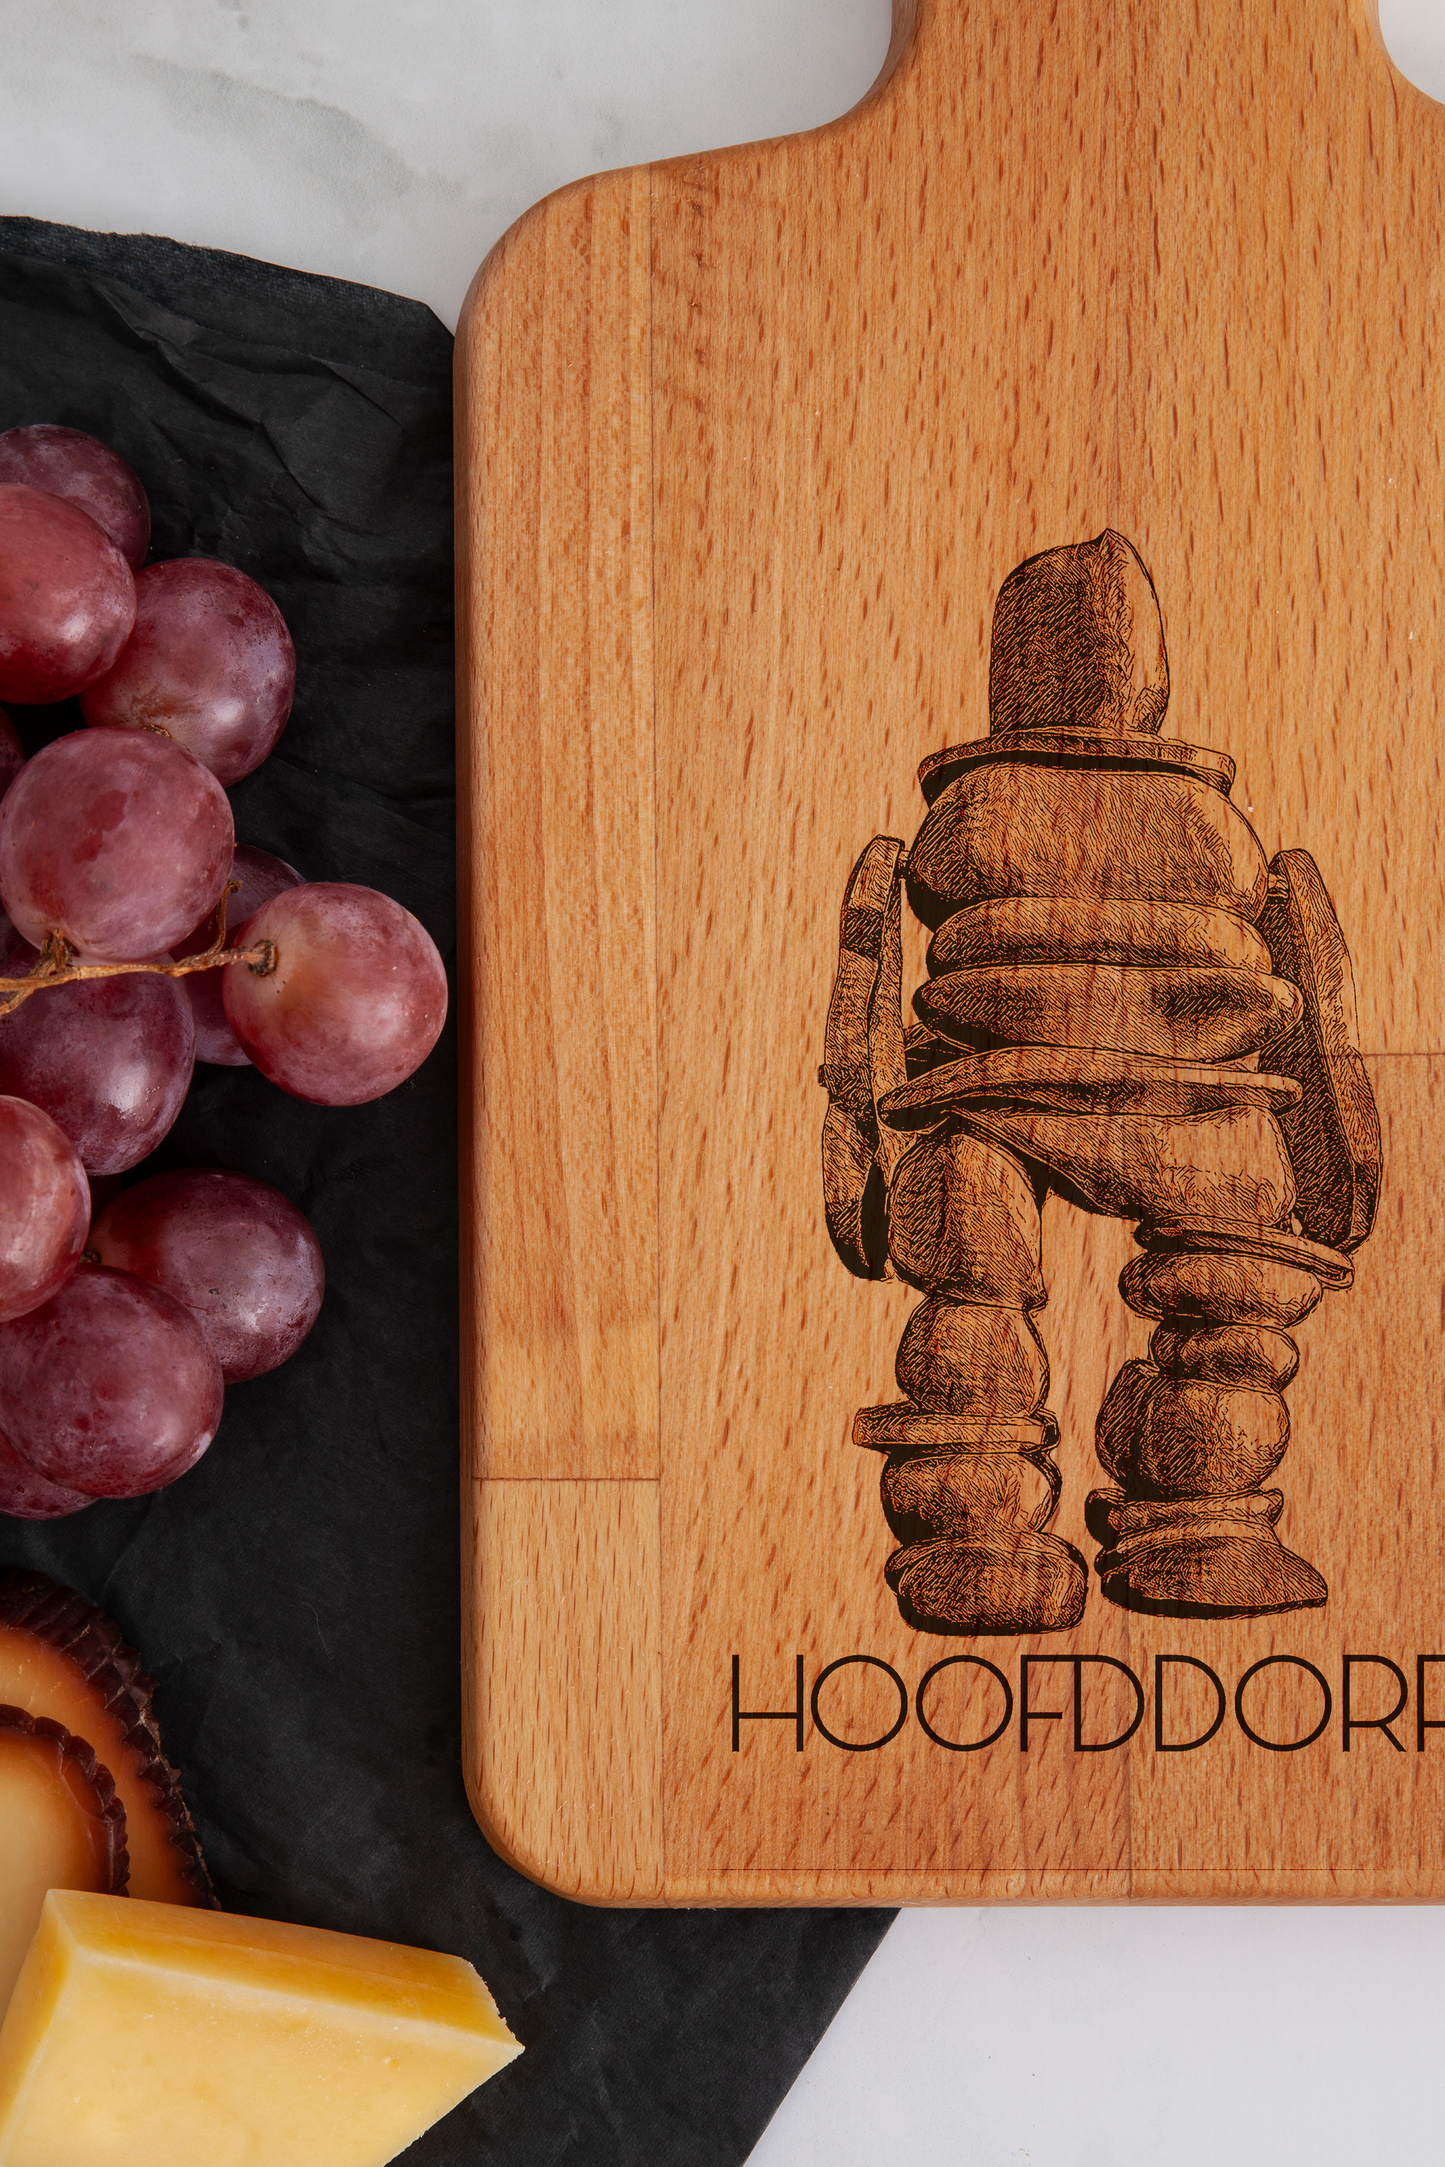 Hoofddorp, Mannetje, cheese board, close-up